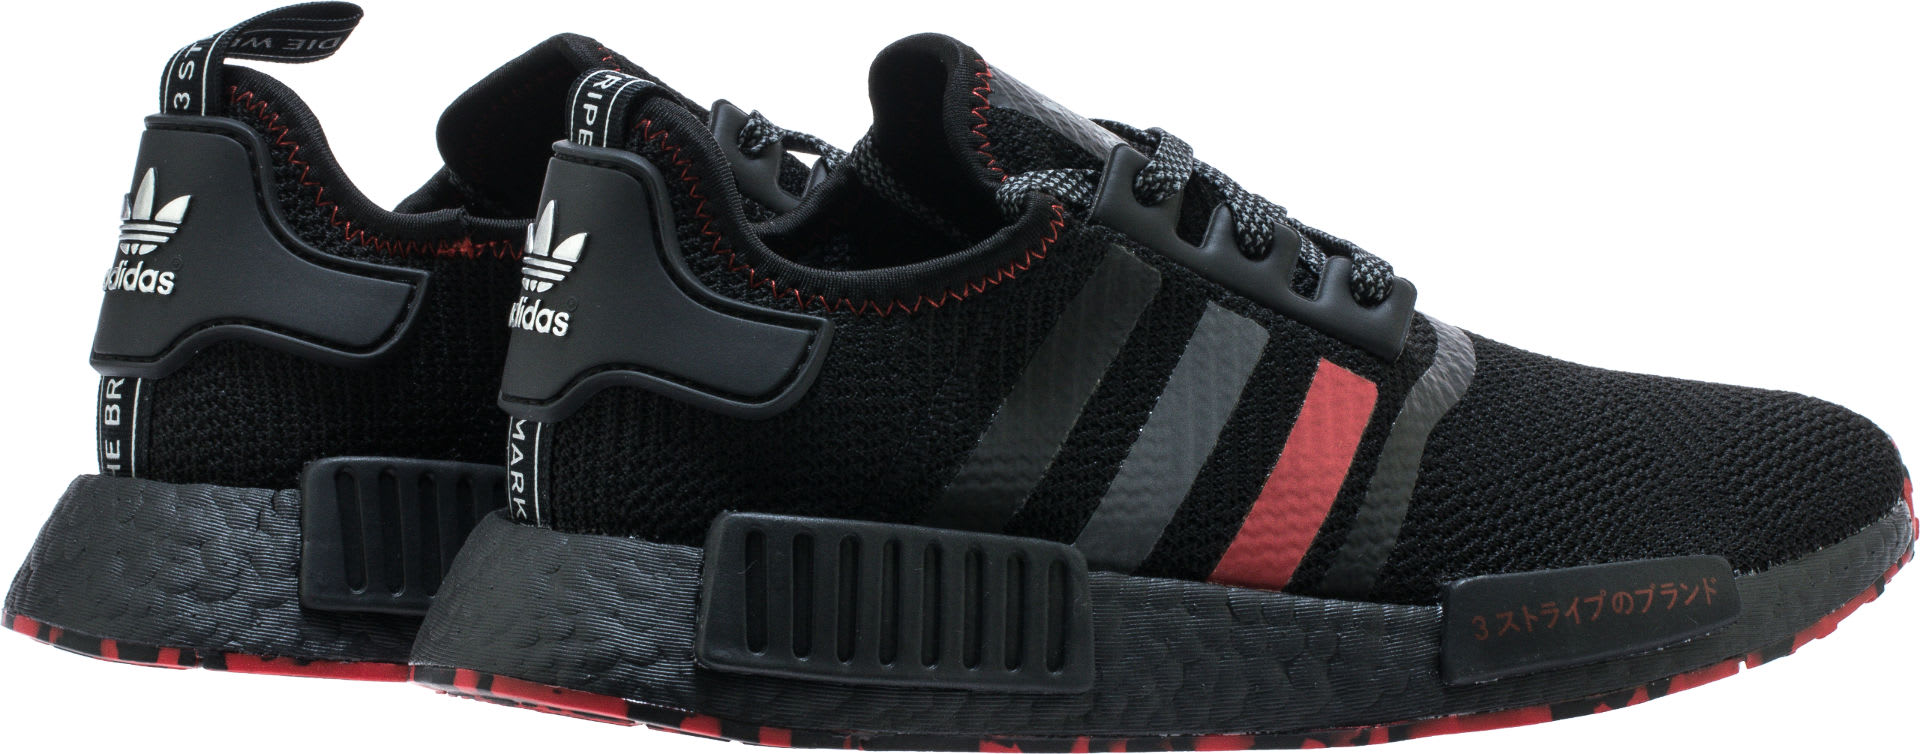 adidas-nmd-r1-red-marble-g26514-heel